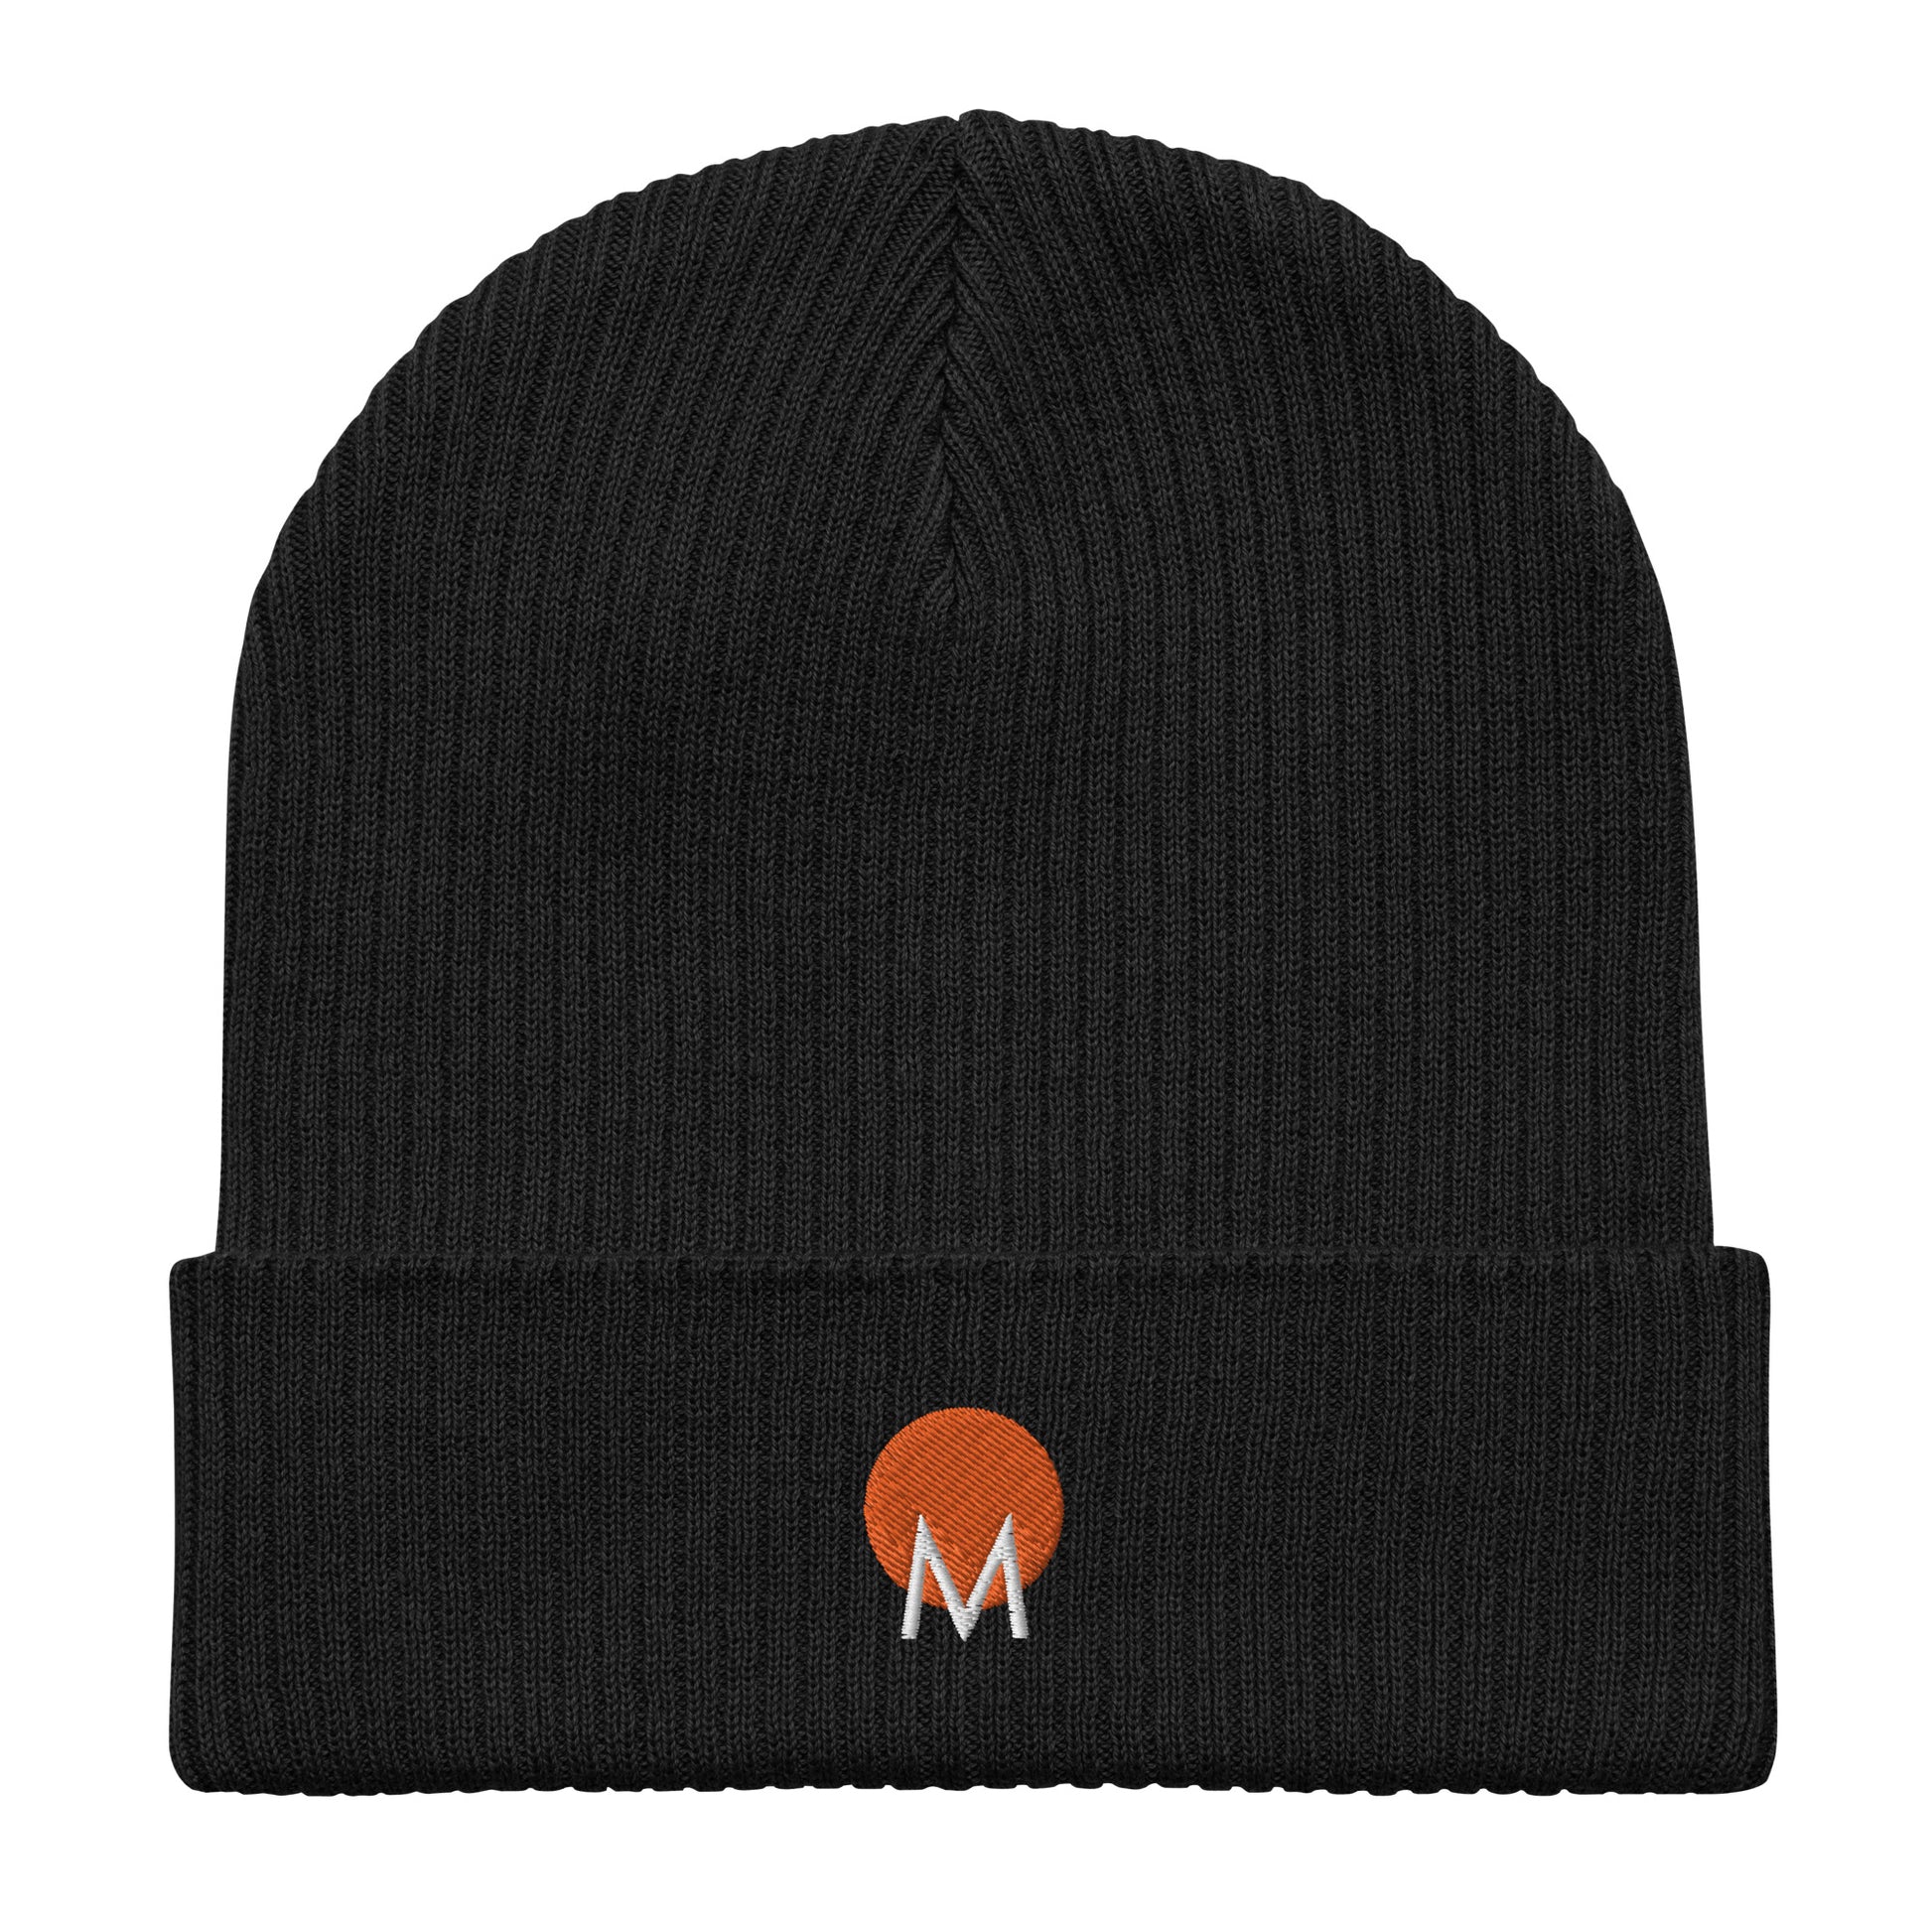 Organic ribbed beanie. Eco-friendly, making it an absolute must-have for your hat selection. Thanks to its breathable lightweight fabric, you can wear it both indoors and outdoors.